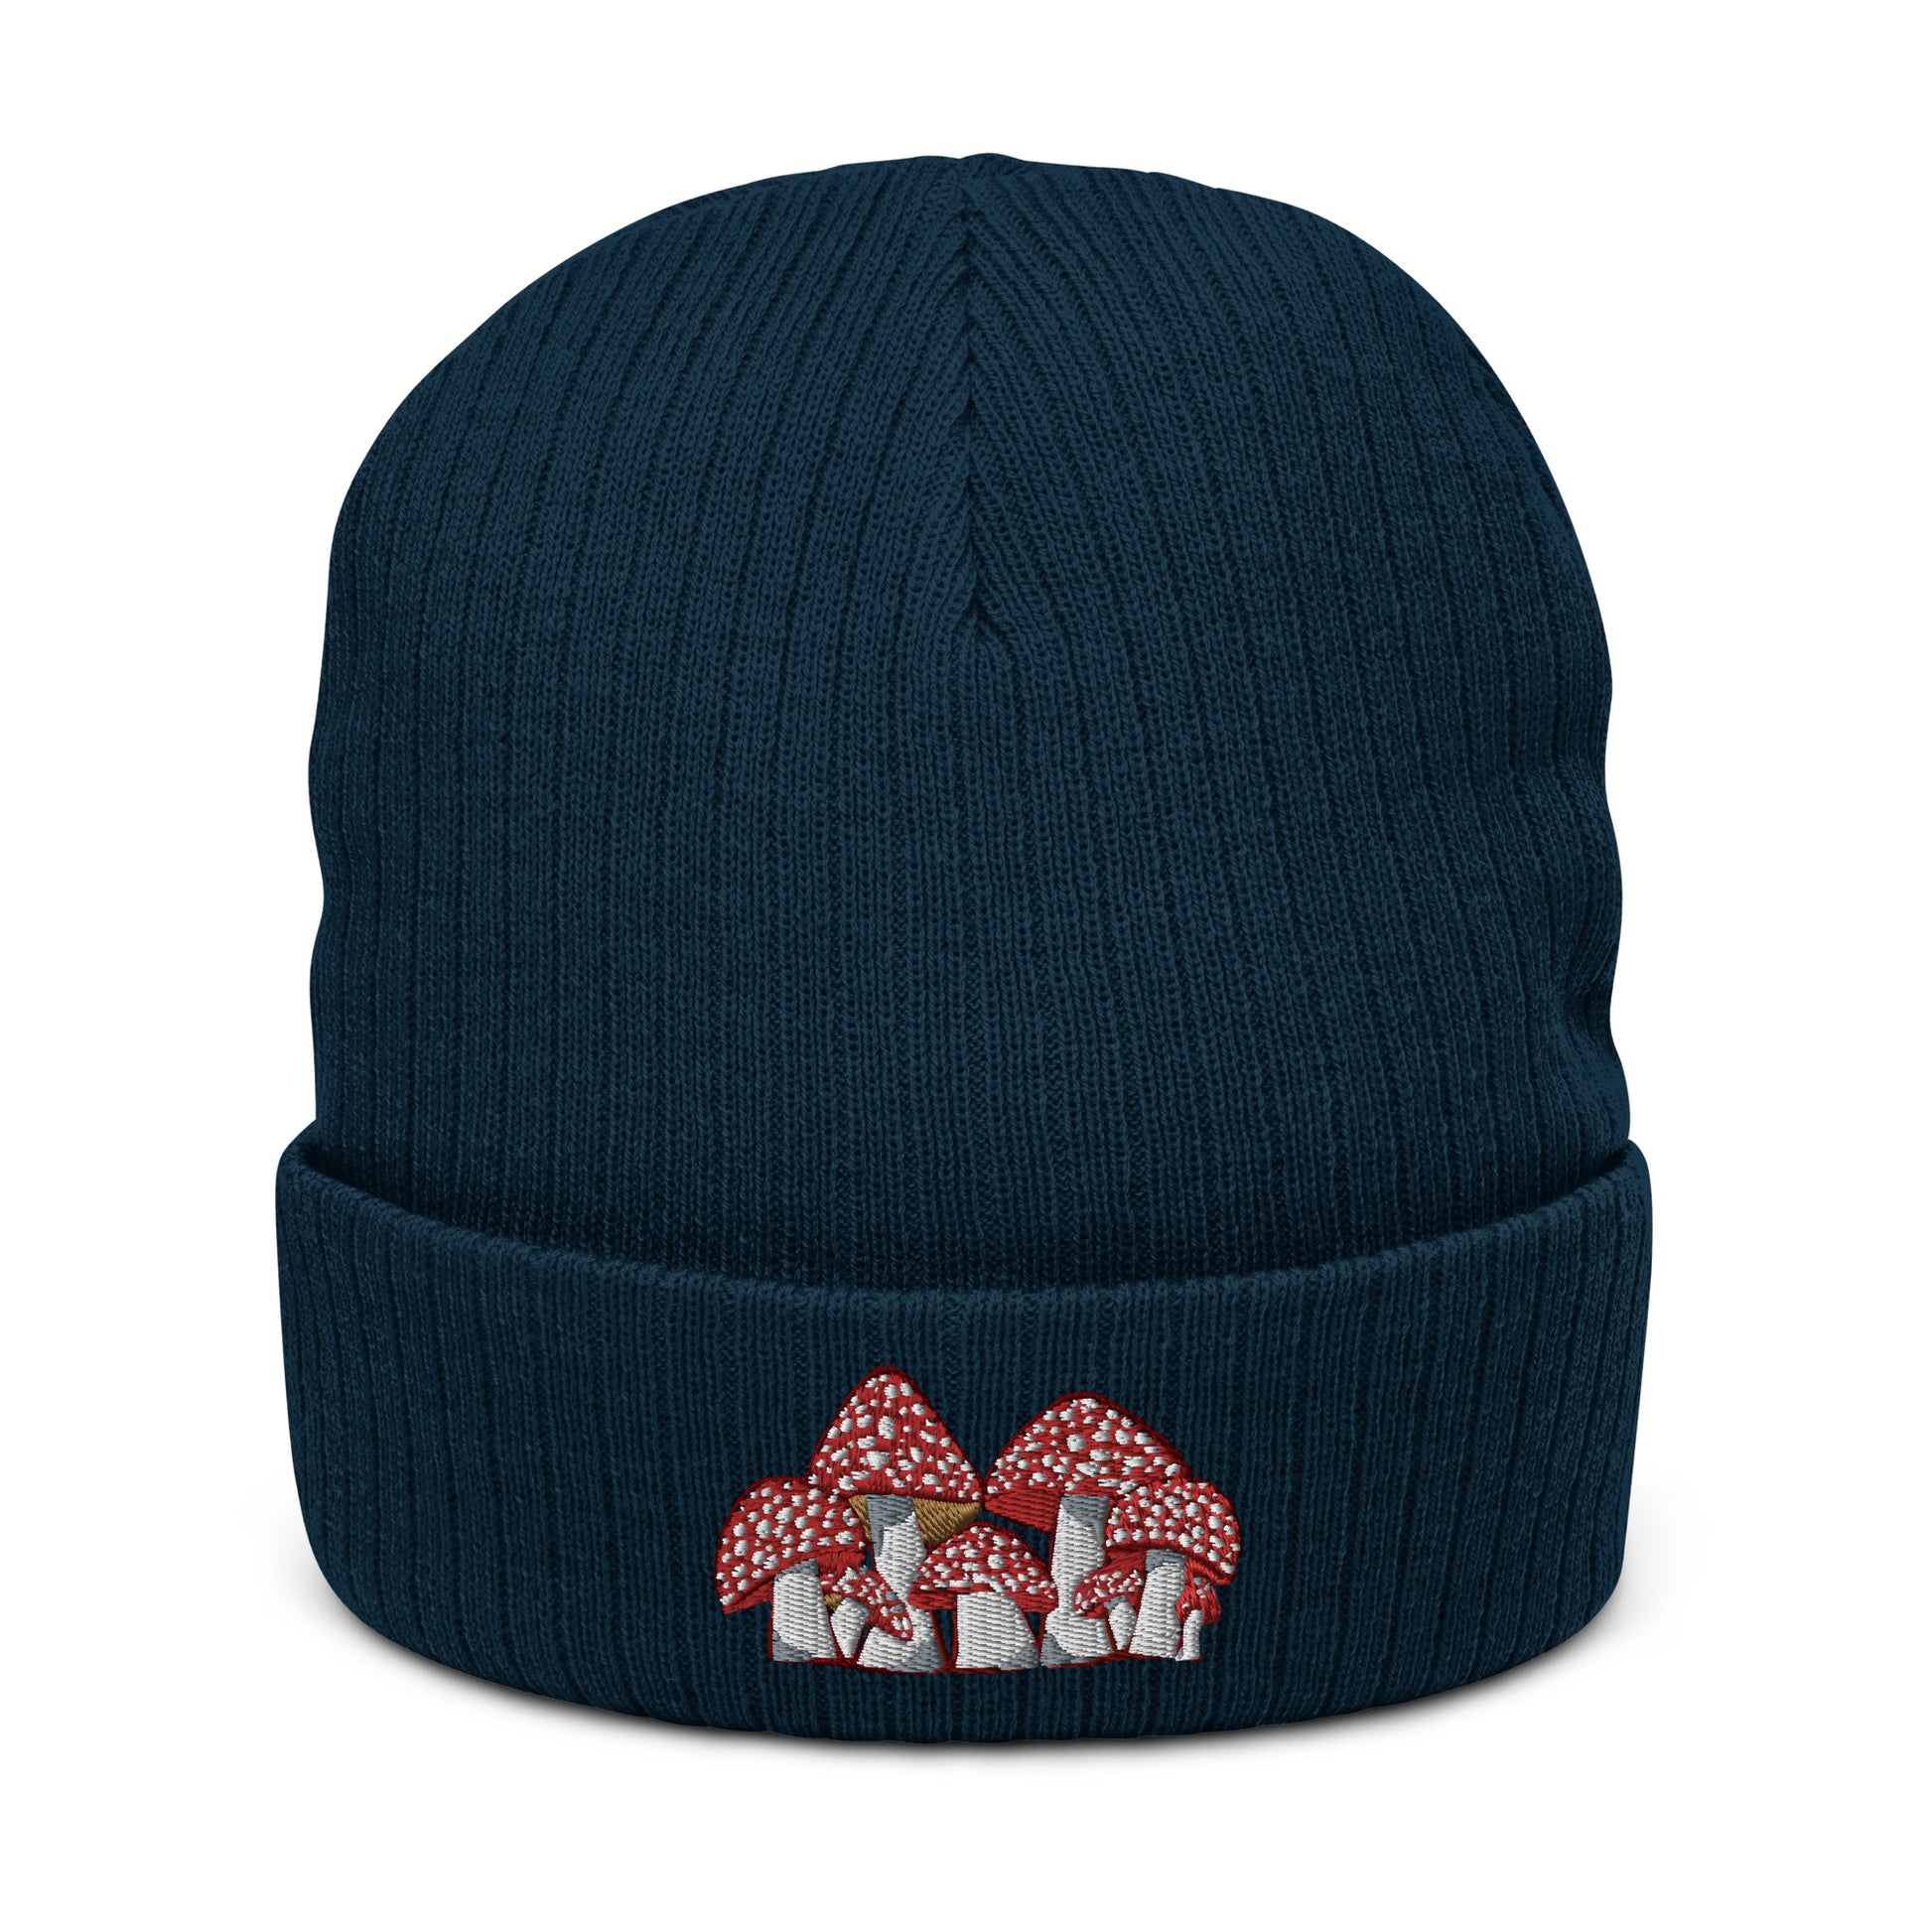 A navy ribbed knit beanie has an embroidery of Fly Agaric mushrooms on the front.